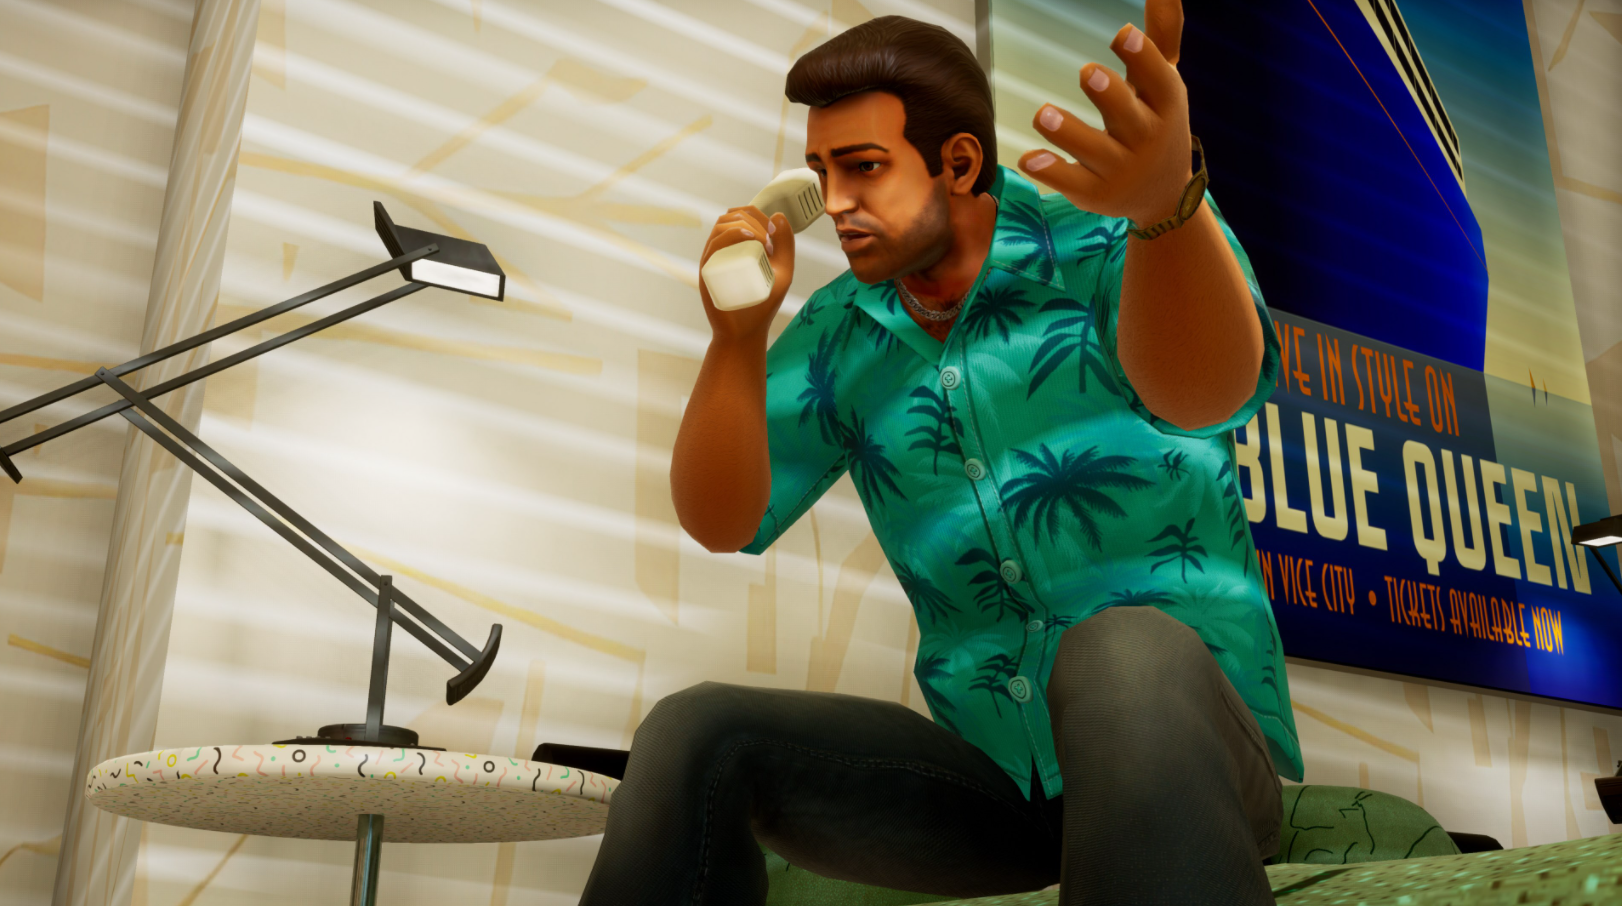 GTA Vice City Cheat codes for PS4, PC, and Xbox